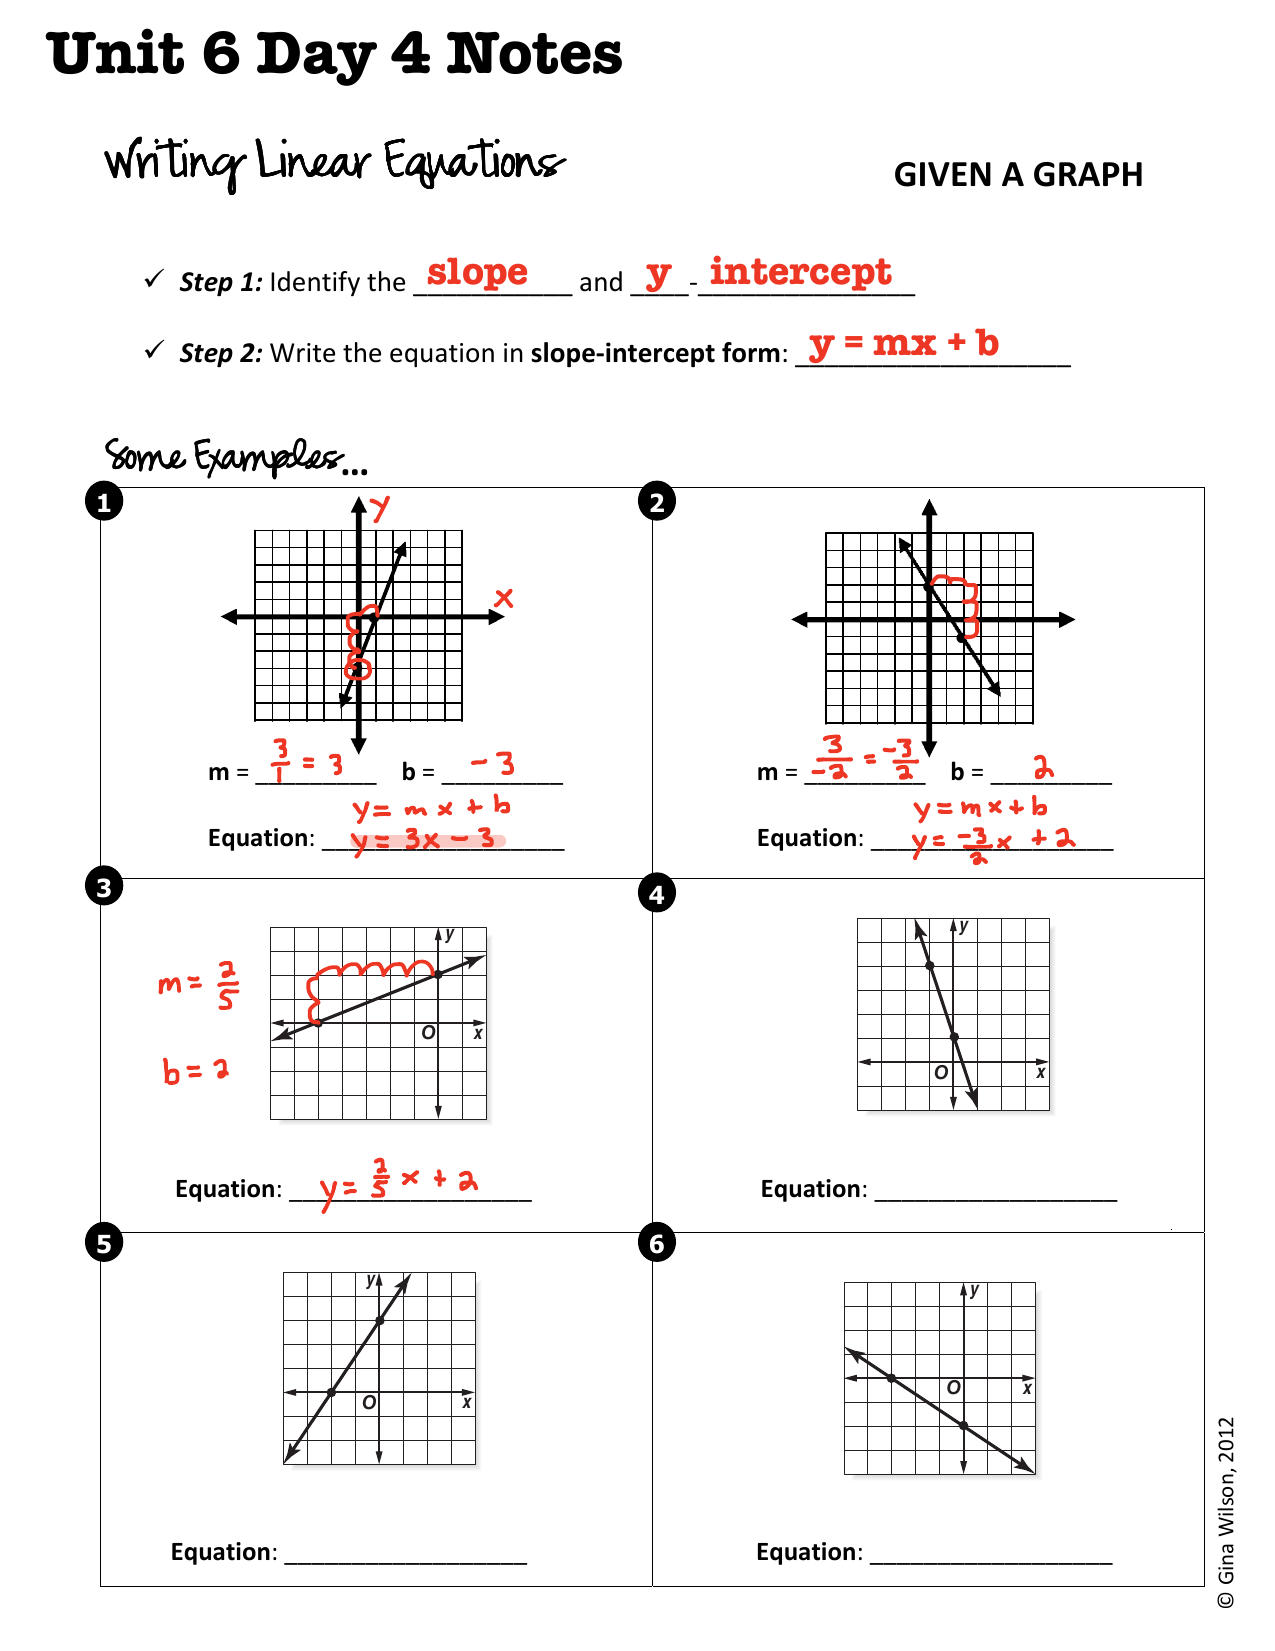 Writing Linear Equations Inside Graphing Linear Functions Worksheet